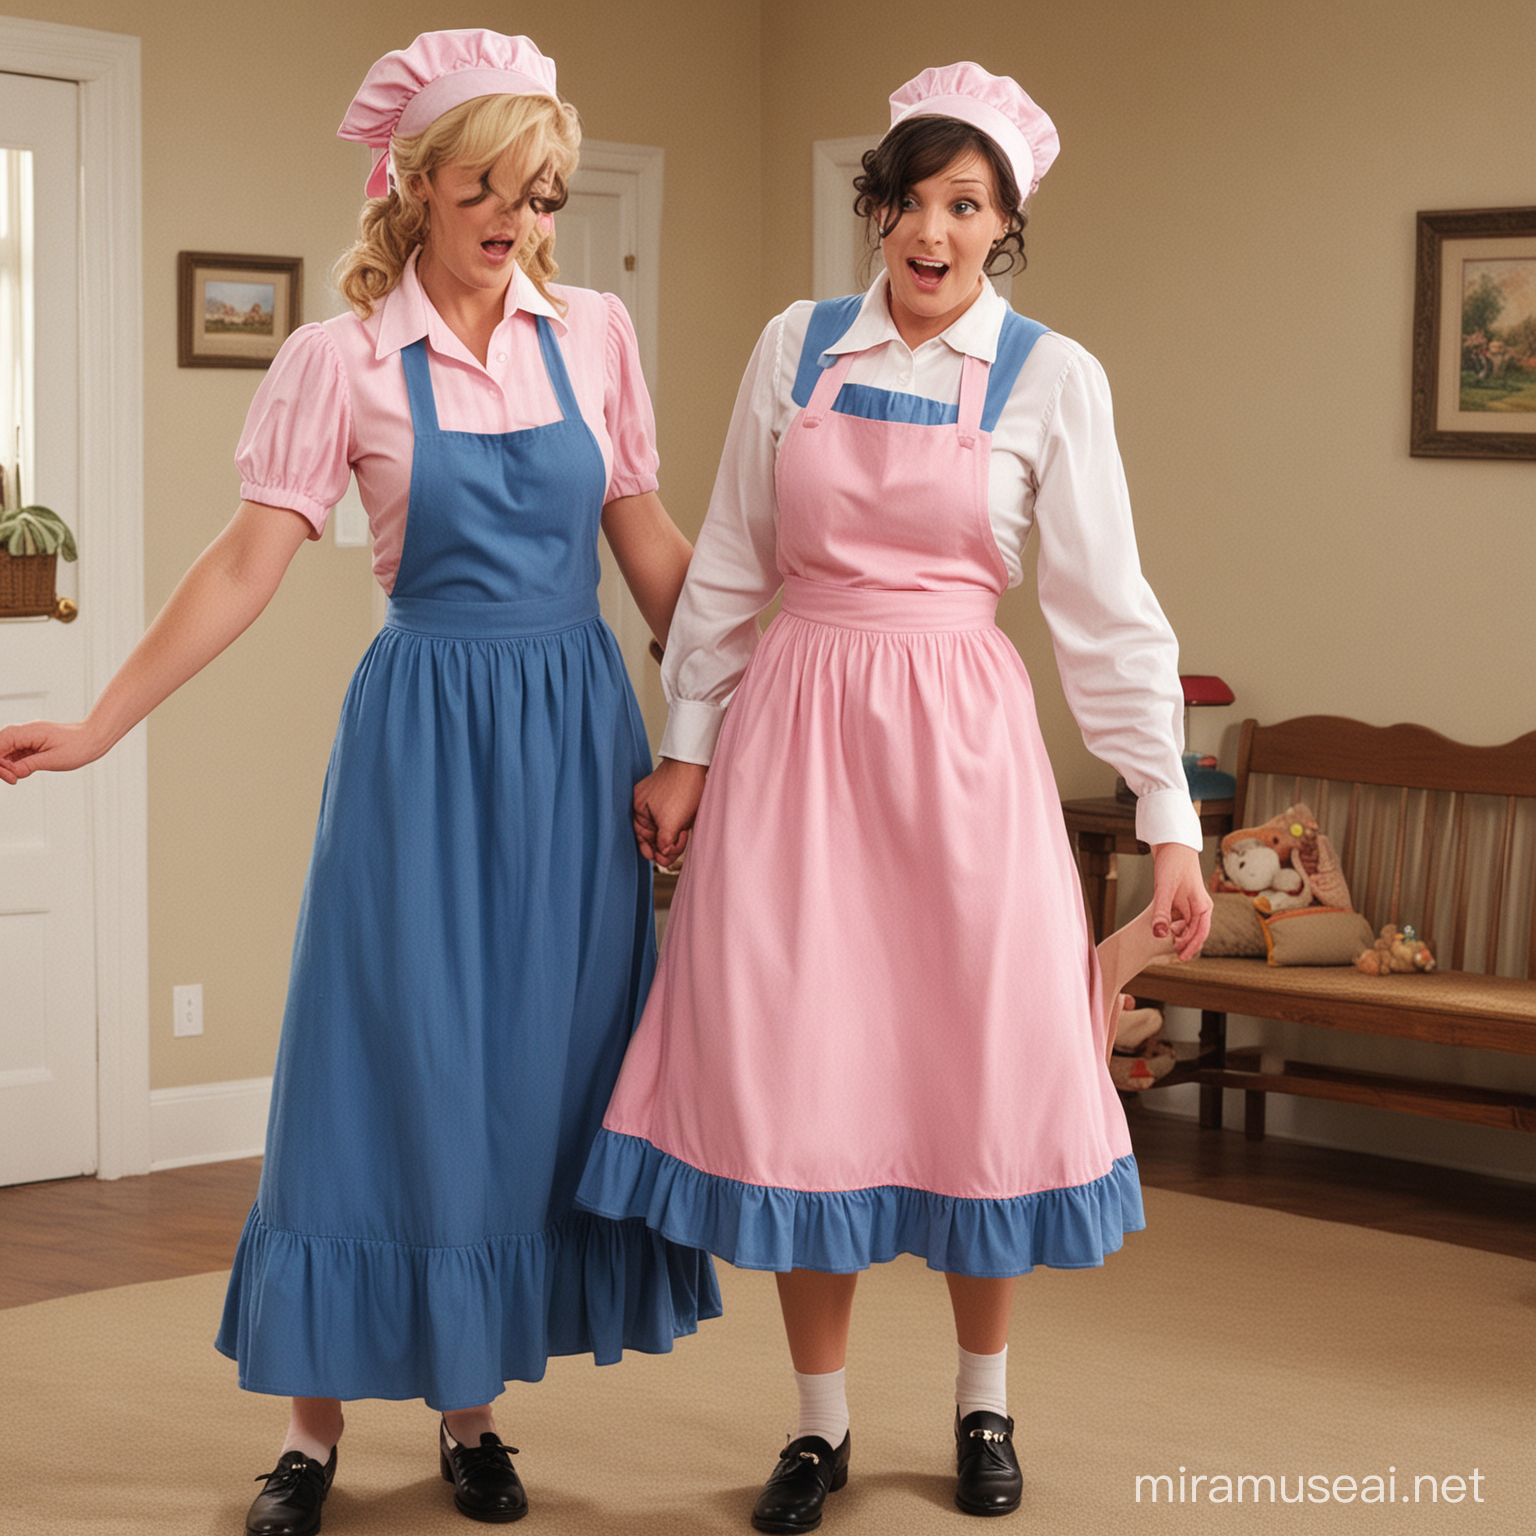 nursery rhyme jack and jill jack falling down jill surprised and going to come tumbling after milf jill wearing pink shirt blue long skirt apron mob cap
